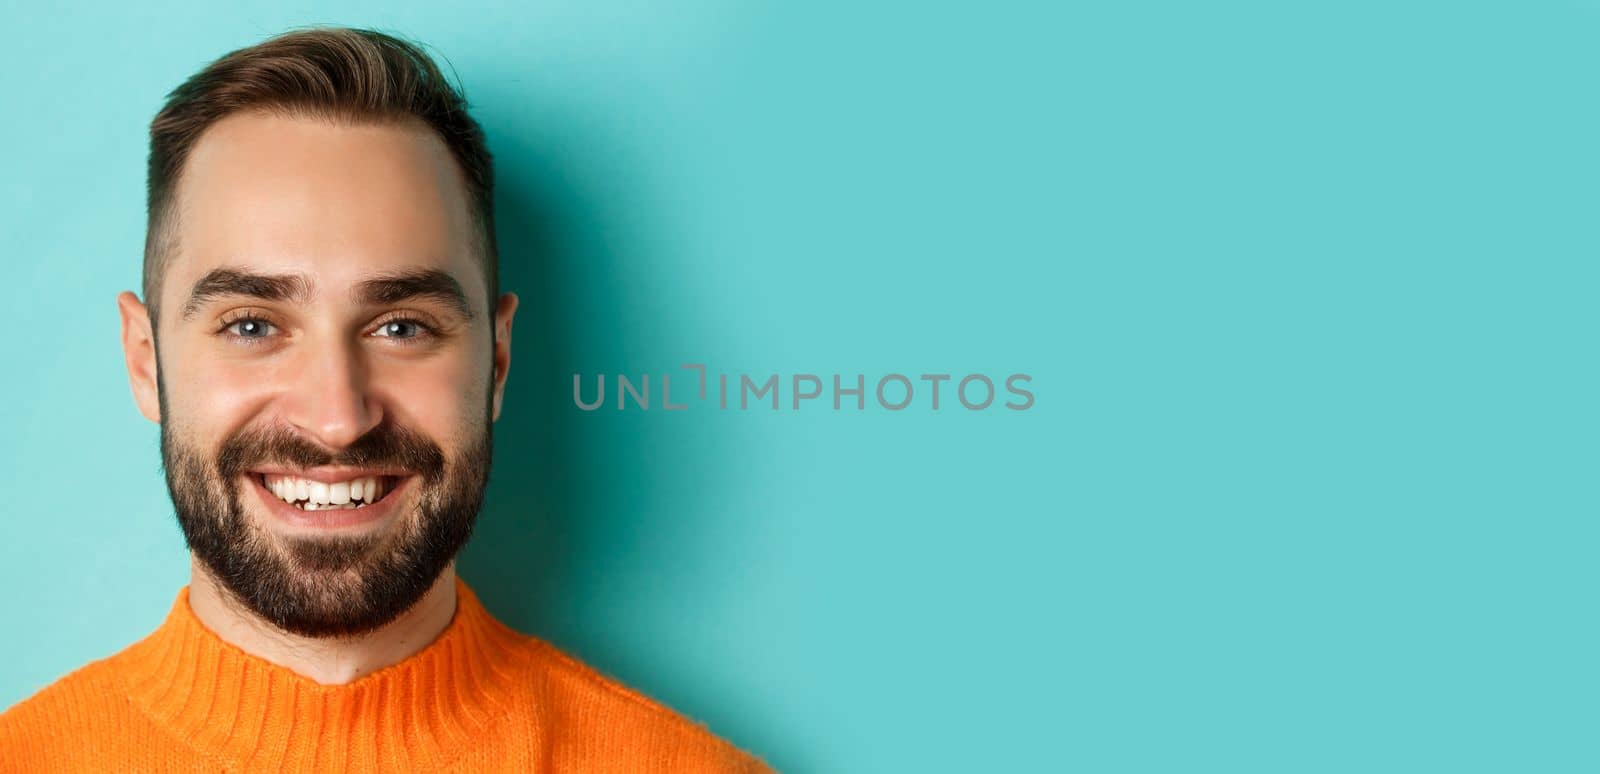 Headshot of handsome caucasian man with beard smiling happy at camera, standing in orange sweater against turquoise background.